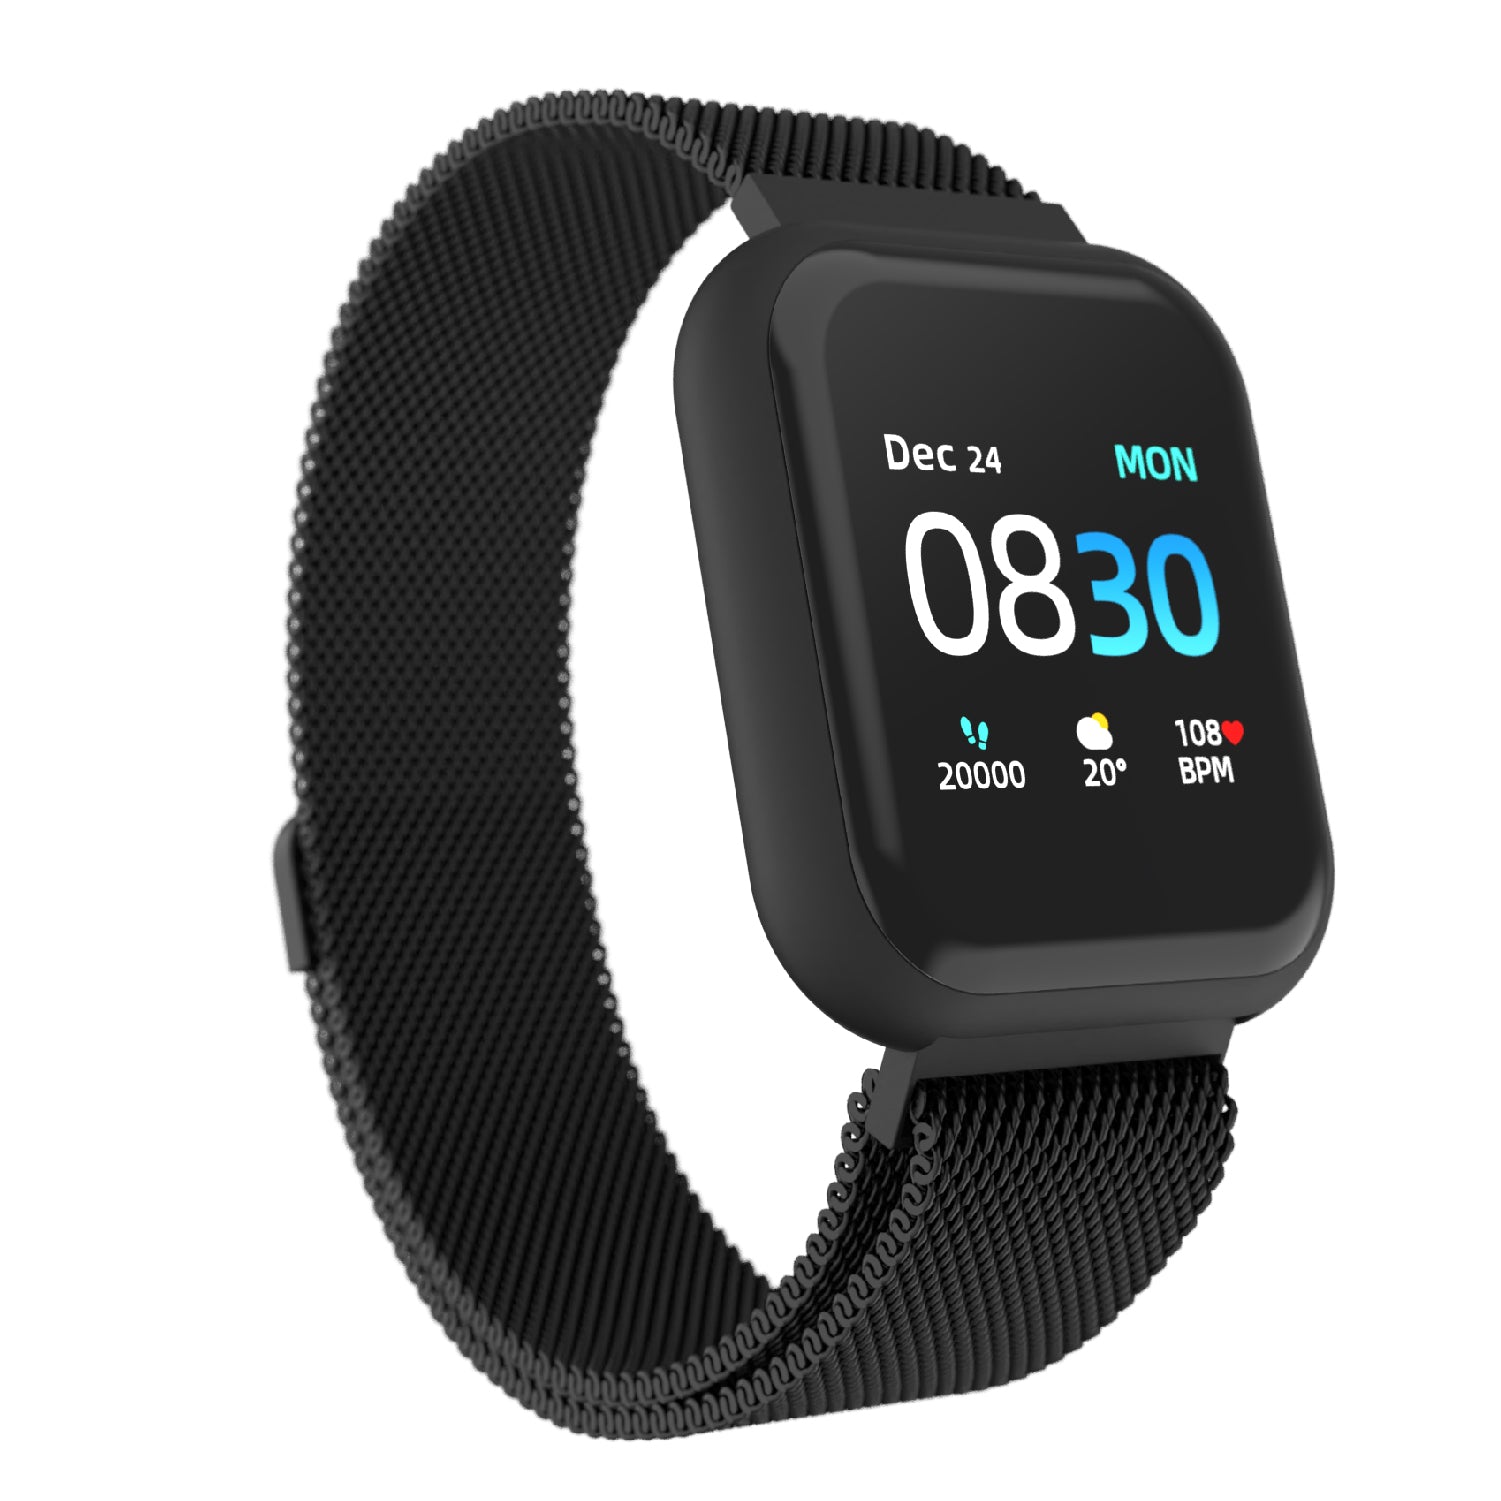 iTouch Air 3 Smartwatch in Black with Black Mesh Strap